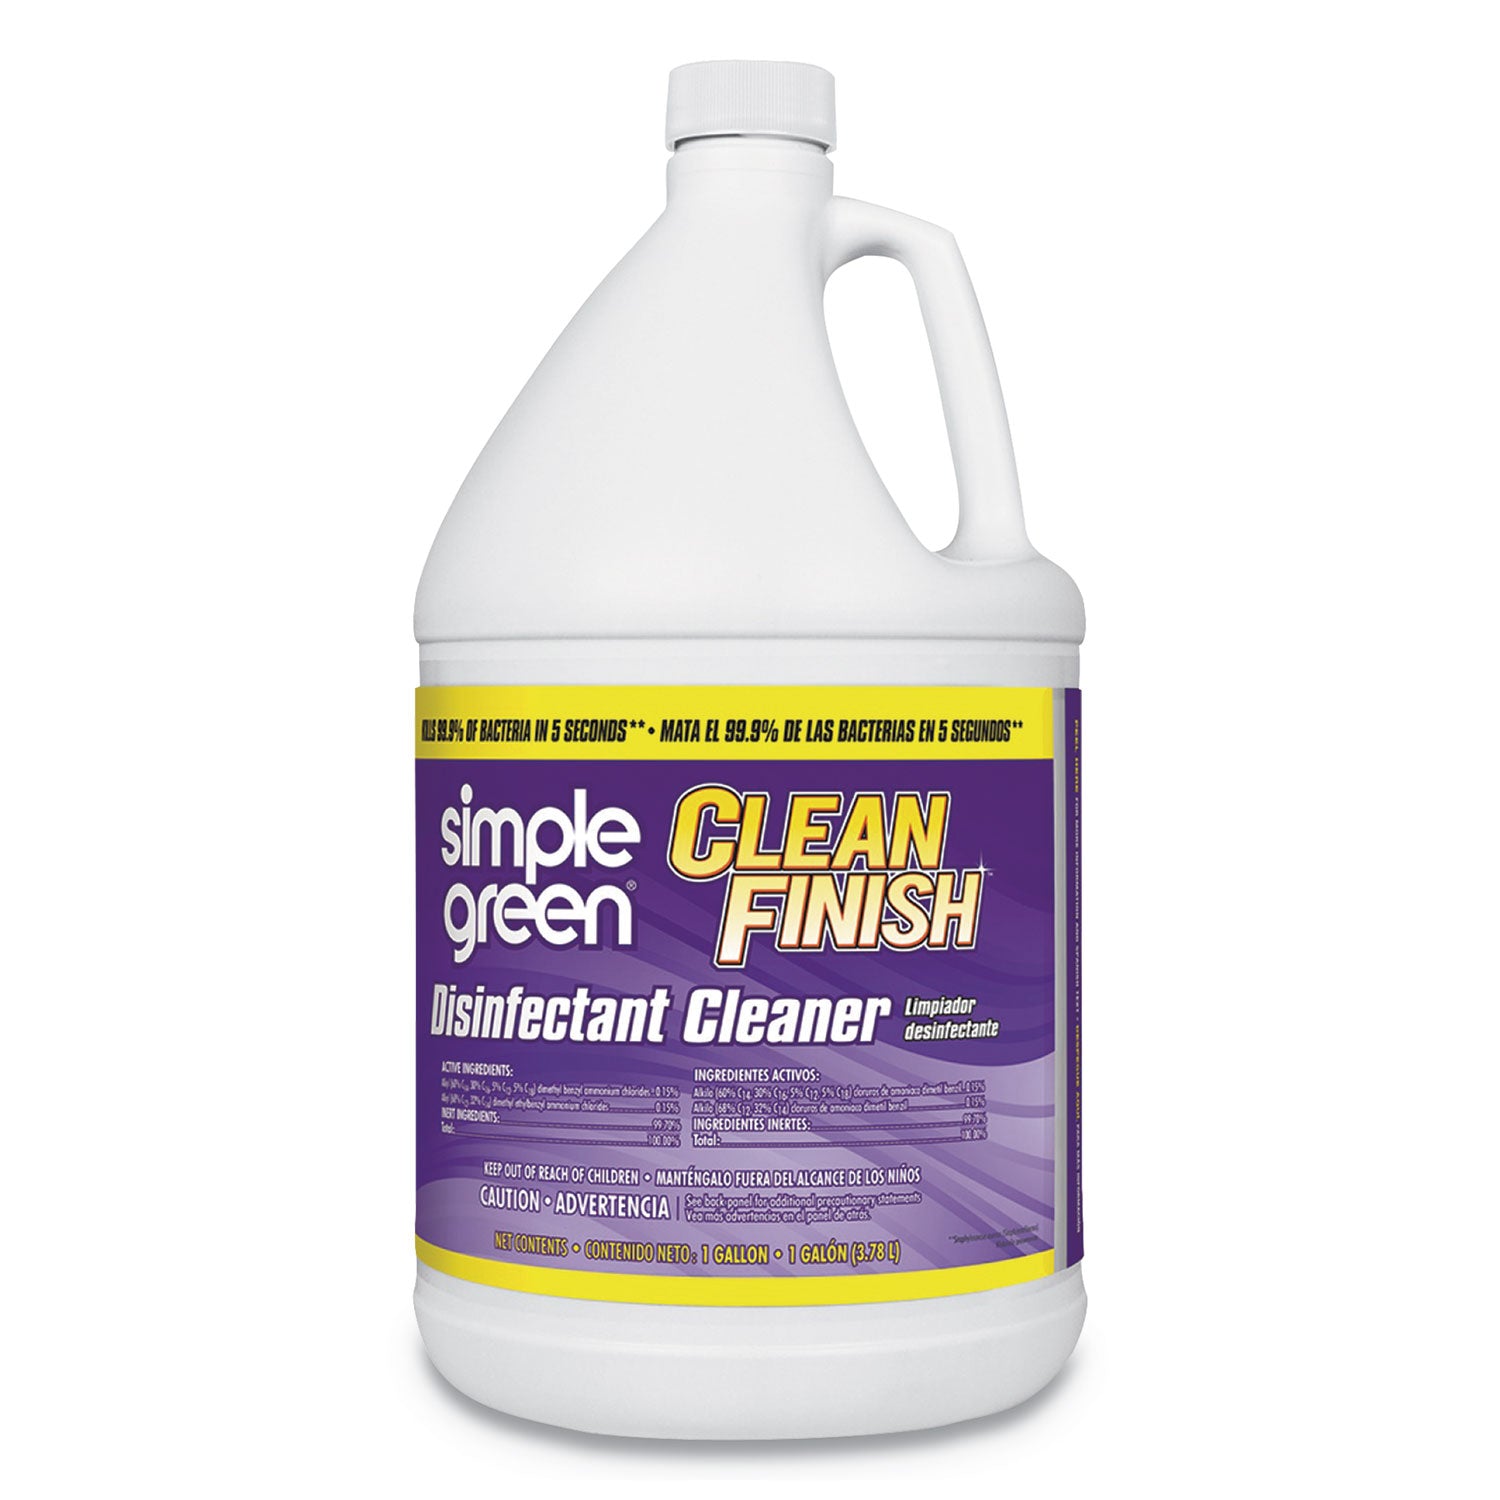 clean-finish-disinfectant-cleaner-1-gal-bottle-herbal-4-ct_smp01128 - 1